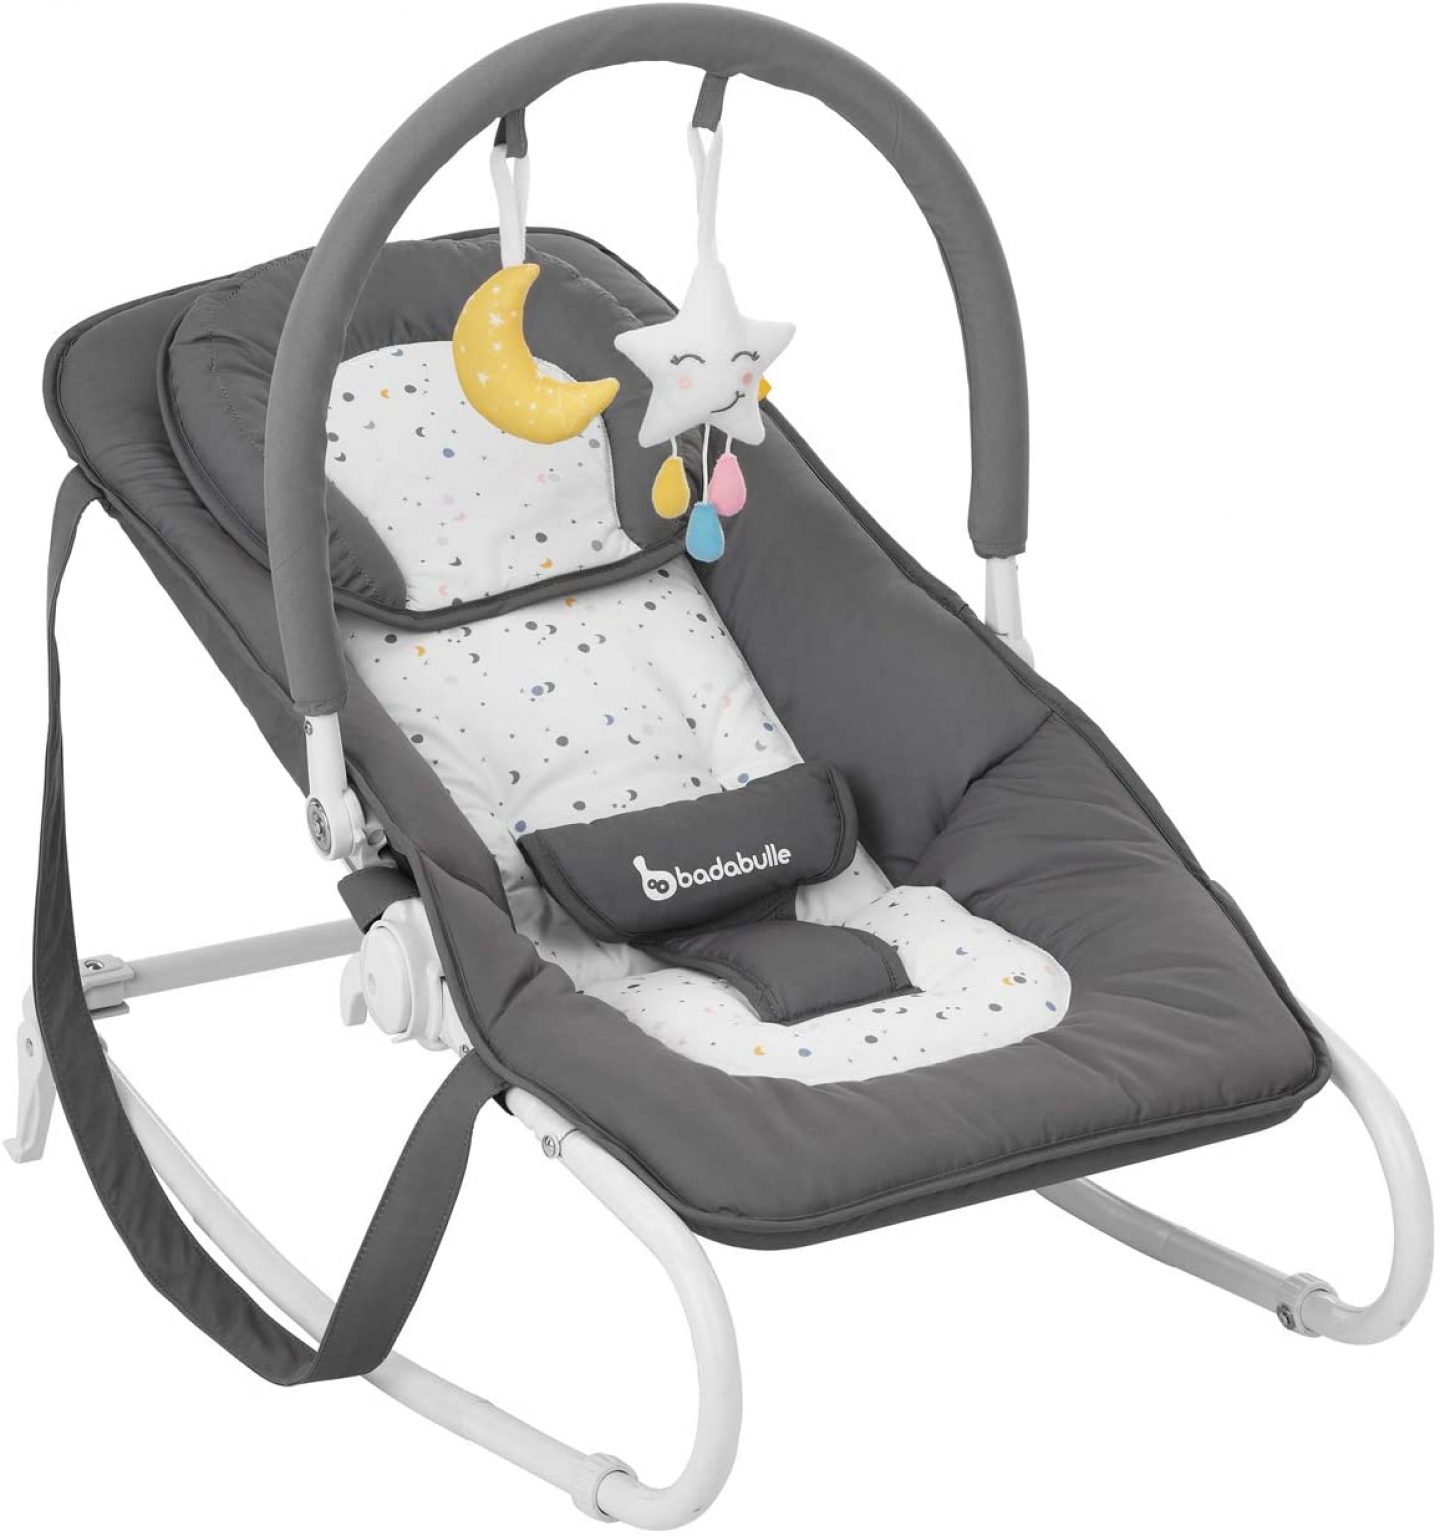 Best Baby Bouncer Chairs Tested & Reviewed